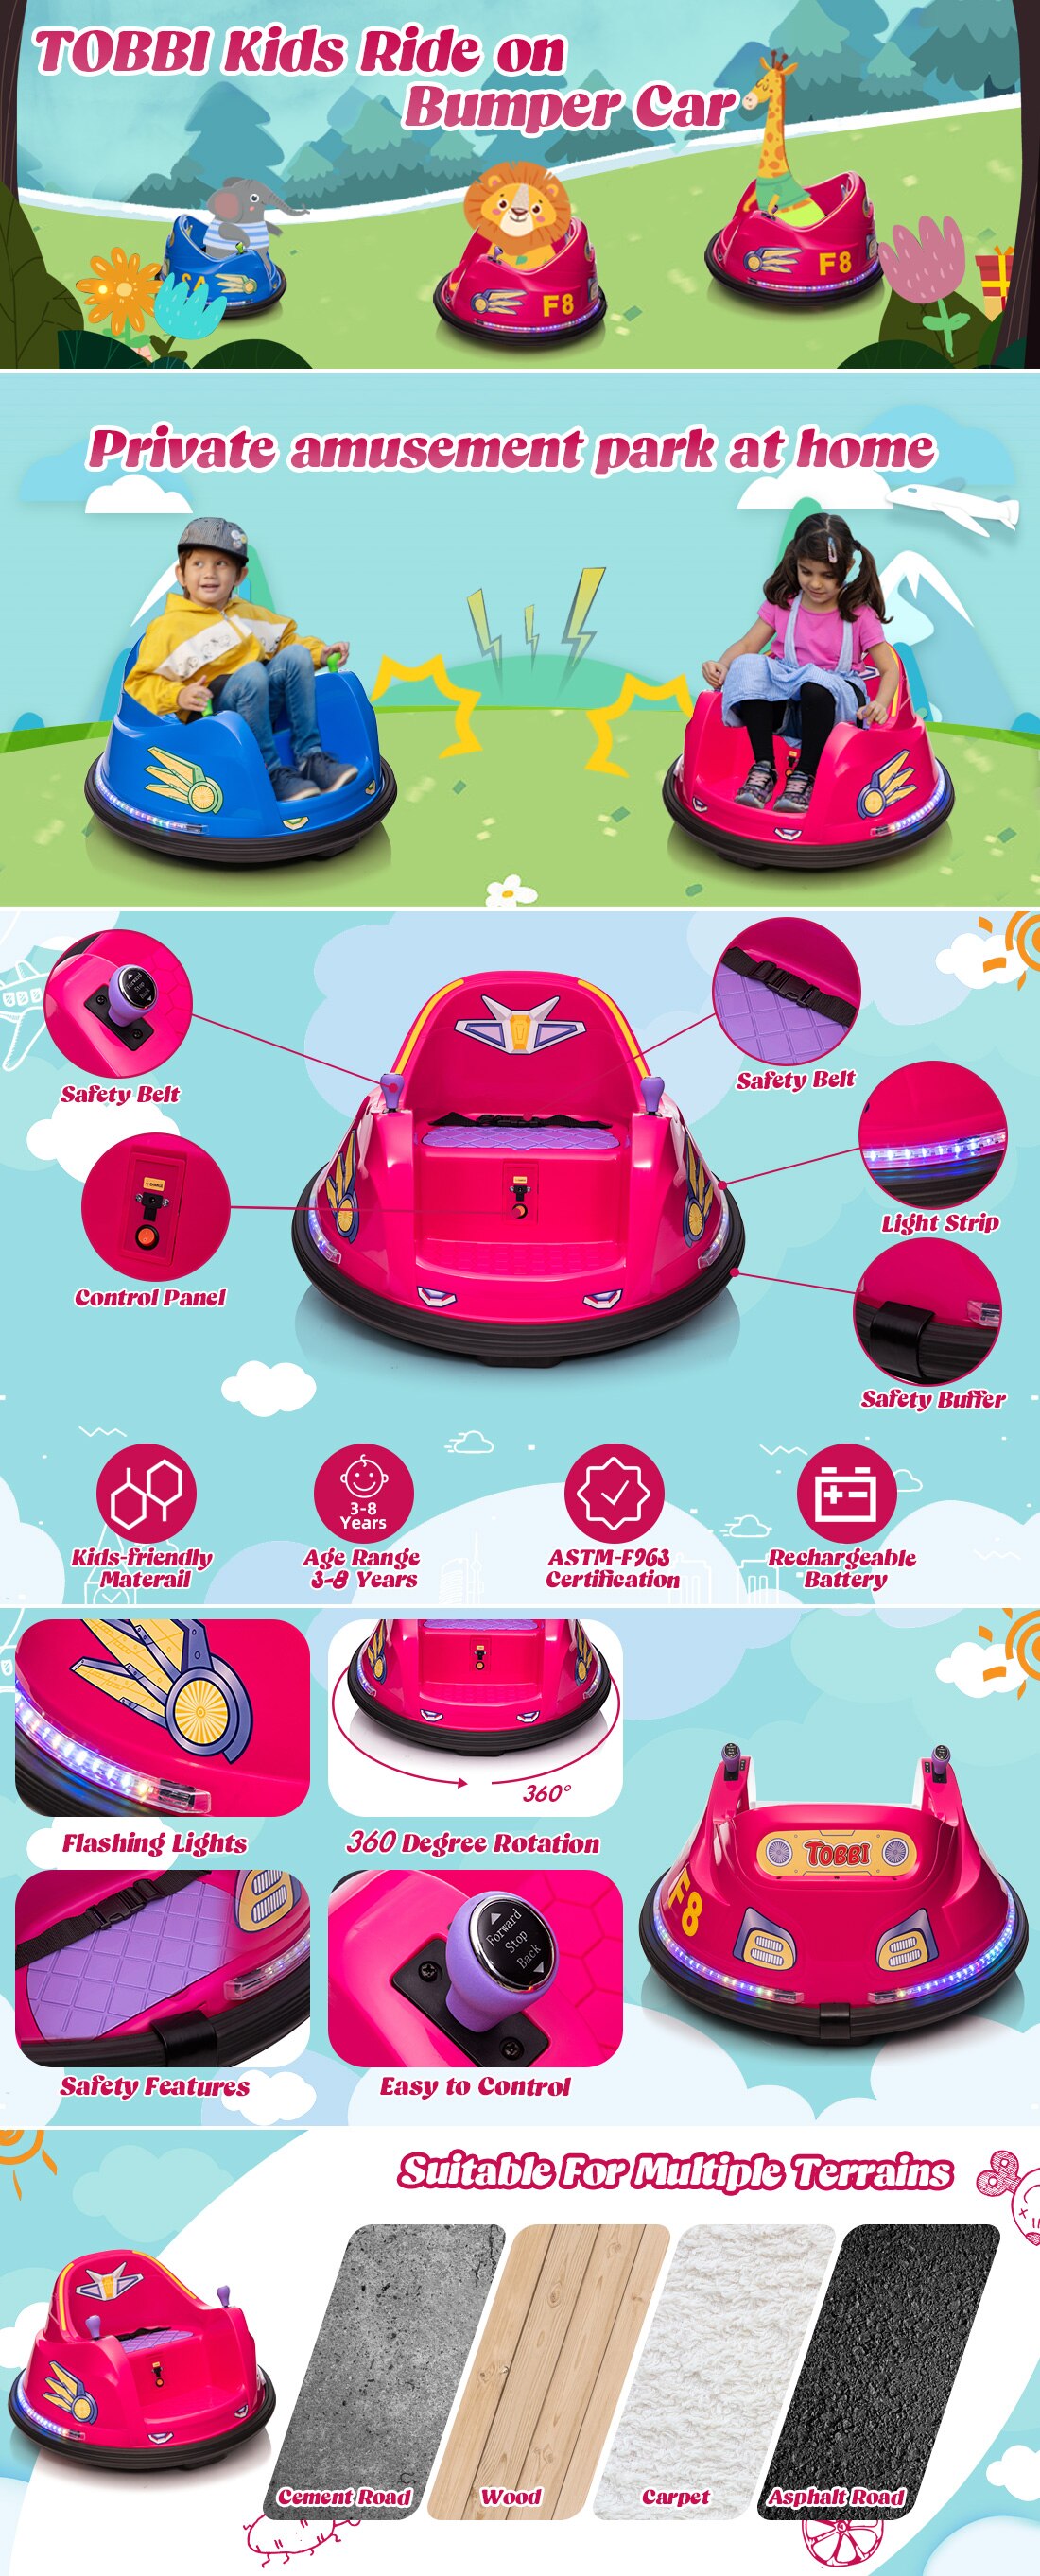 TOBBI TH17K0865 6-Volt Kids Bumper Car Electric Battery Powered Ride on Vehicle Toy with 360 Spin